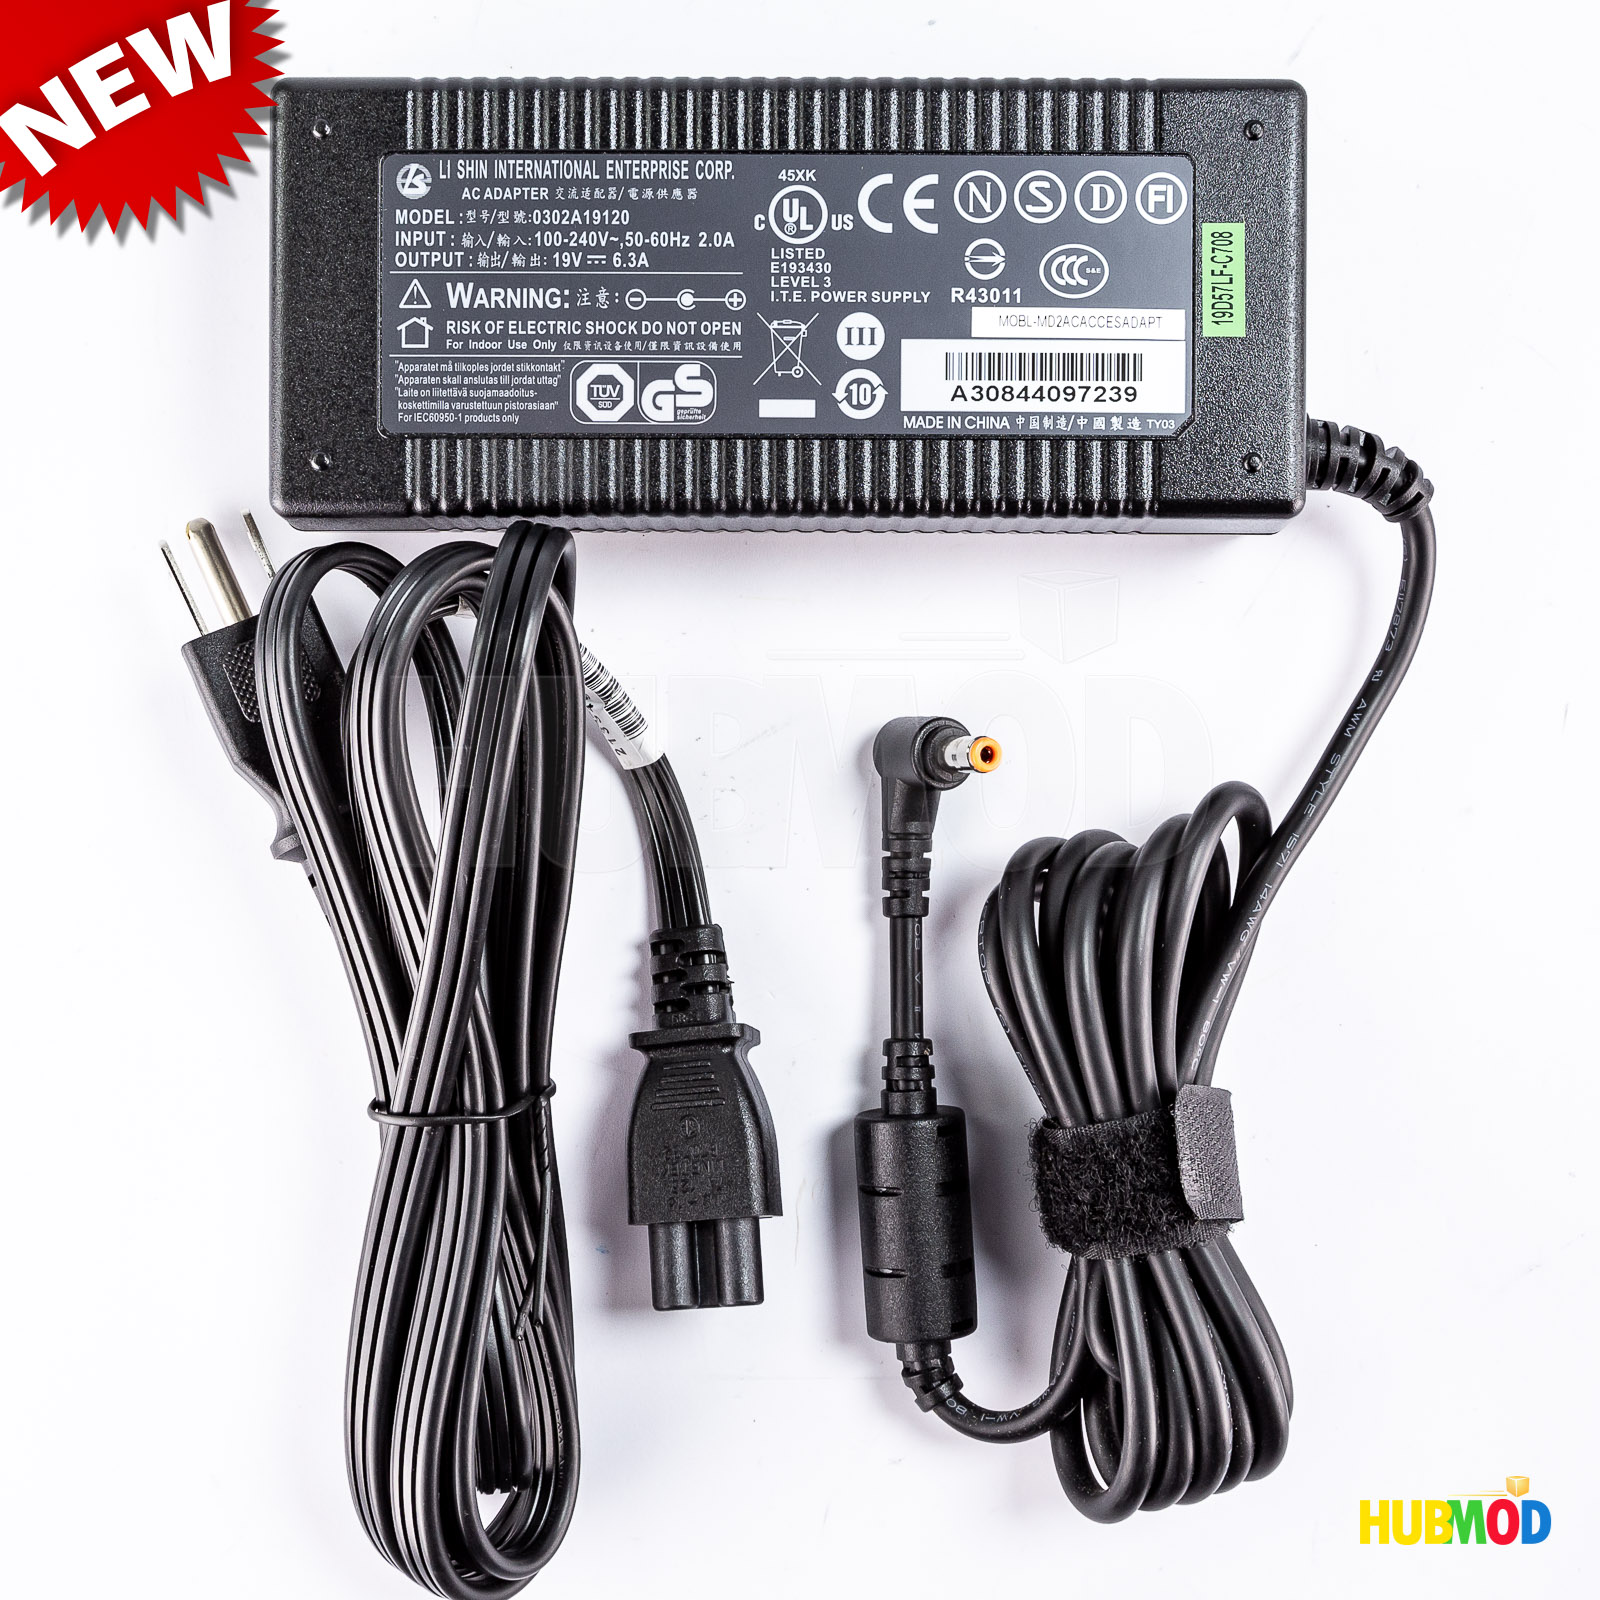 NEW Original ALIENWARE AREA-51 M15X-R1 M15XR1 19V 6.3A AC Power Charger Adapter Brand: LI SHIN Max. Output Power: 12 - Click Image to Close